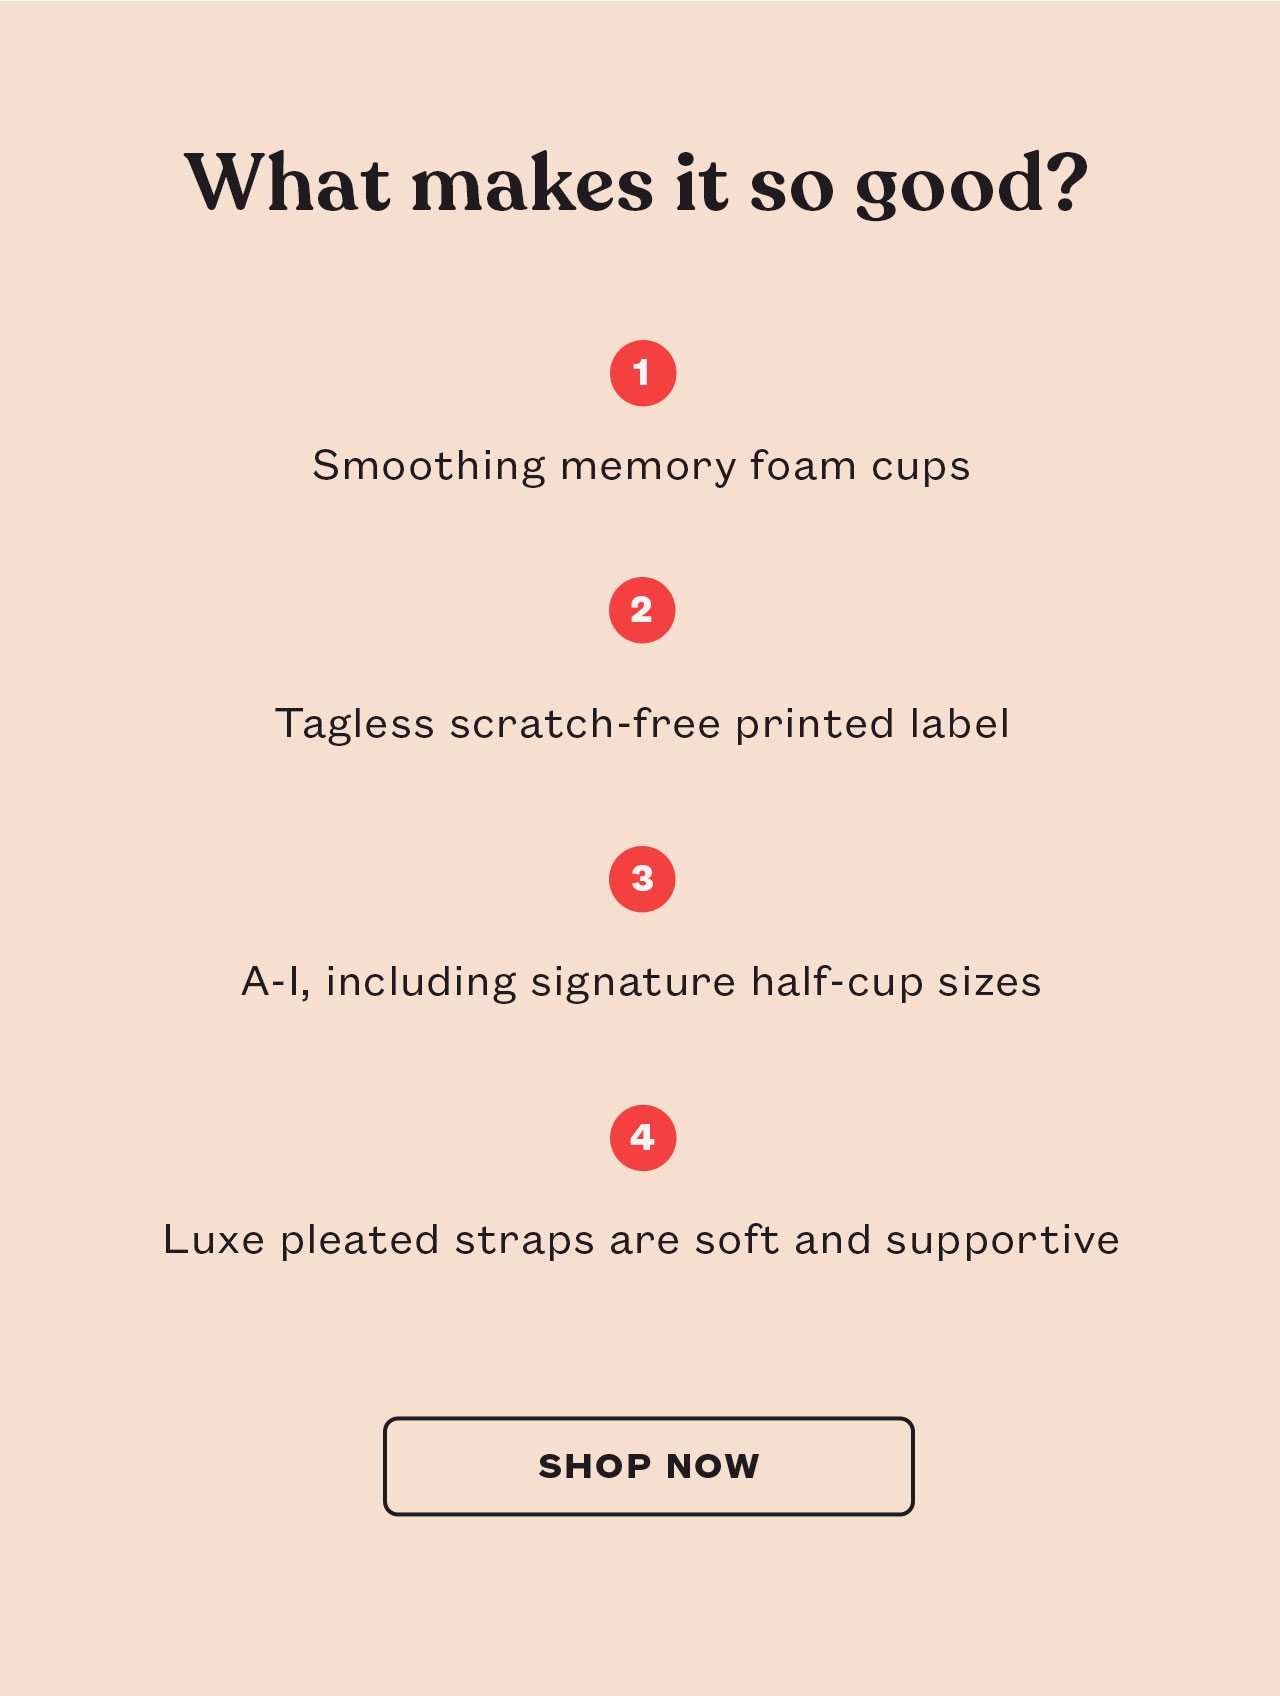 What makes it so good? -Smoothig memory foam cups -Tagless scratch-free printed label -A-I, including signature half-cup sizes -Luxe pleated straps are soft and supportive